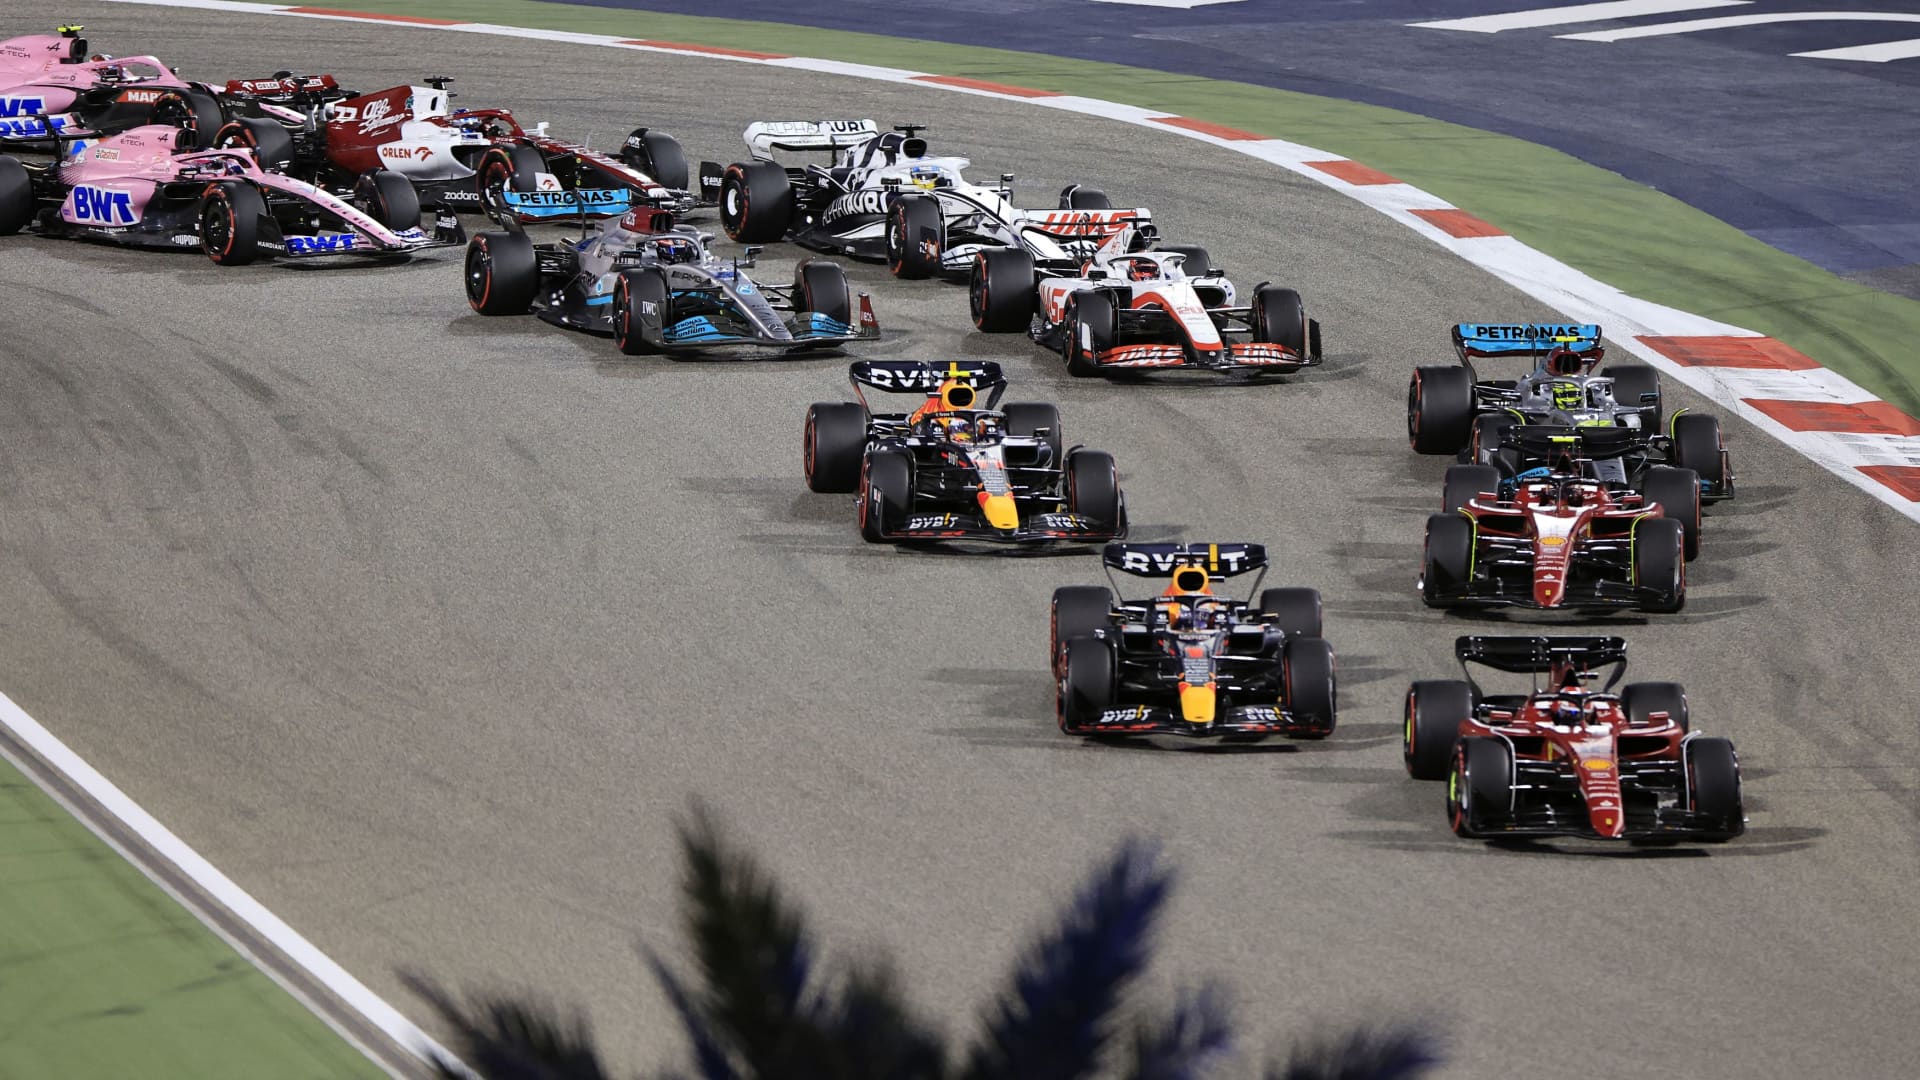 Formula One gets upgraded by Citi, which says concerns around Las Vegas race are 'overblown'